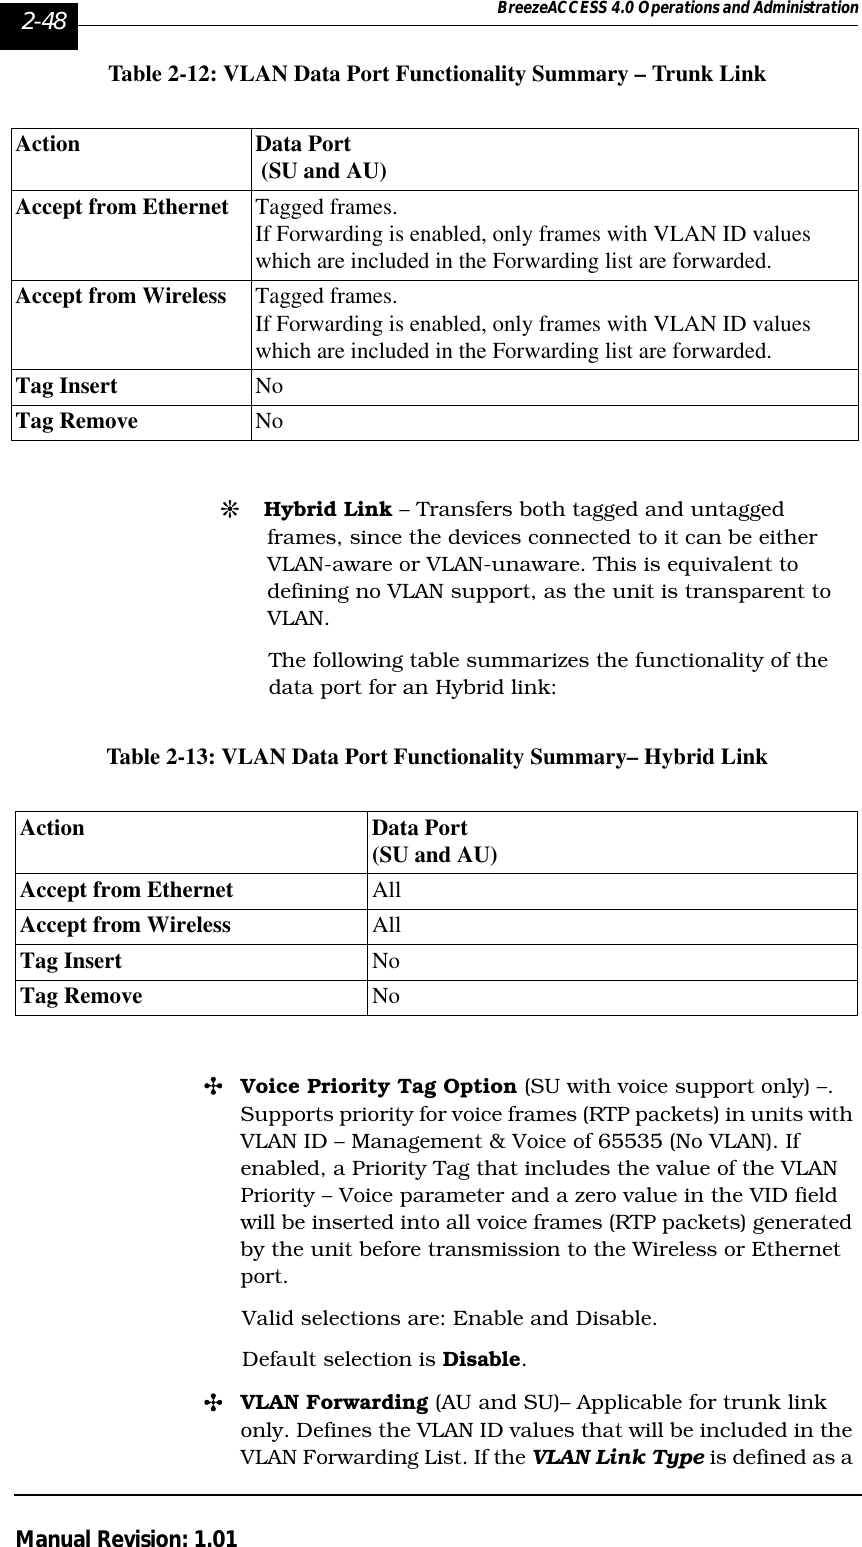 2-48 BreezeACCESS 4.0 Operations and AdministrationManual Revision: 1.01Table 2-12: VLAN Data Port Functionality Summary – Trunk Link#Hybrid Link – Transfers both tagged and untagged frames, since the devices connected to it can be either VLAN-aware or VLAN-unaware. This is equivalent to defining no VLAN support, as the unit is transparent to VLAN.The following table summarizes the functionality of the data port for an Hybrid link:Table 2-13: VLAN Data Port Functionality Summary– Hybrid Link&quot;Voice Priority Tag Option (SU with voice support only) –. Supports priority for voice frames (RTP packets) in units with VLAN ID – Management &amp; Voice of 65535 (No VLAN). If enabled, a Priority Tag that includes the value of the VLAN Priority – Voice parameter and a zero value in the VID field will be inserted into all voice frames (RTP packets) generated by the unit before transmission to the Wireless or Ethernet port. Valid selections are: Enable and Disable. Default selection is Disable.&quot;VLAN Forwarding (AU and SU)– Applicable for trunk link only. Defines the VLAN ID values that will be included in the VLAN Forwarding List. If the VLAN Link Type is defined as a Action Data Port (SU and AU)Accept from Ethernet Tagged frames.If Forwarding is enabled, only frames with VLAN ID values which are included in the Forwarding list are forwarded. Accept from Wireless Tagged frames.If Forwarding is enabled, only frames with VLAN ID values which are included in the Forwarding list are forwarded.Tag Insert NoTag Remove NoAction Data Port(SU and AU)Accept from Ethernet All Accept from Wireless All Tag Insert  No Tag Remove No